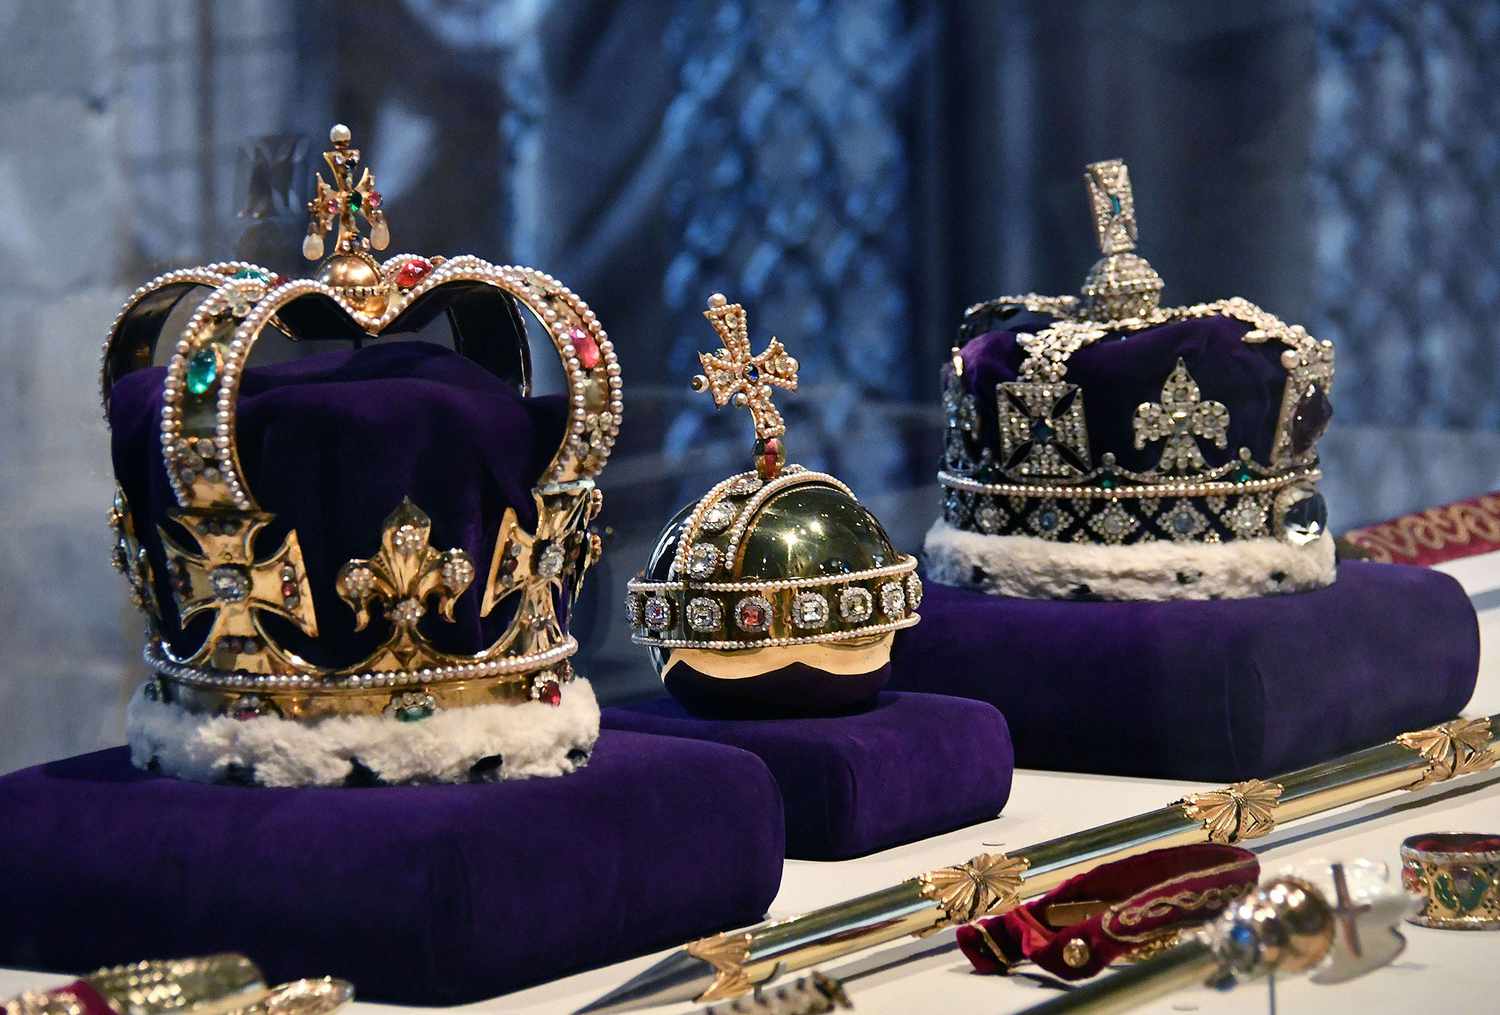 Royal Treasures on Display at Westminster Abbey